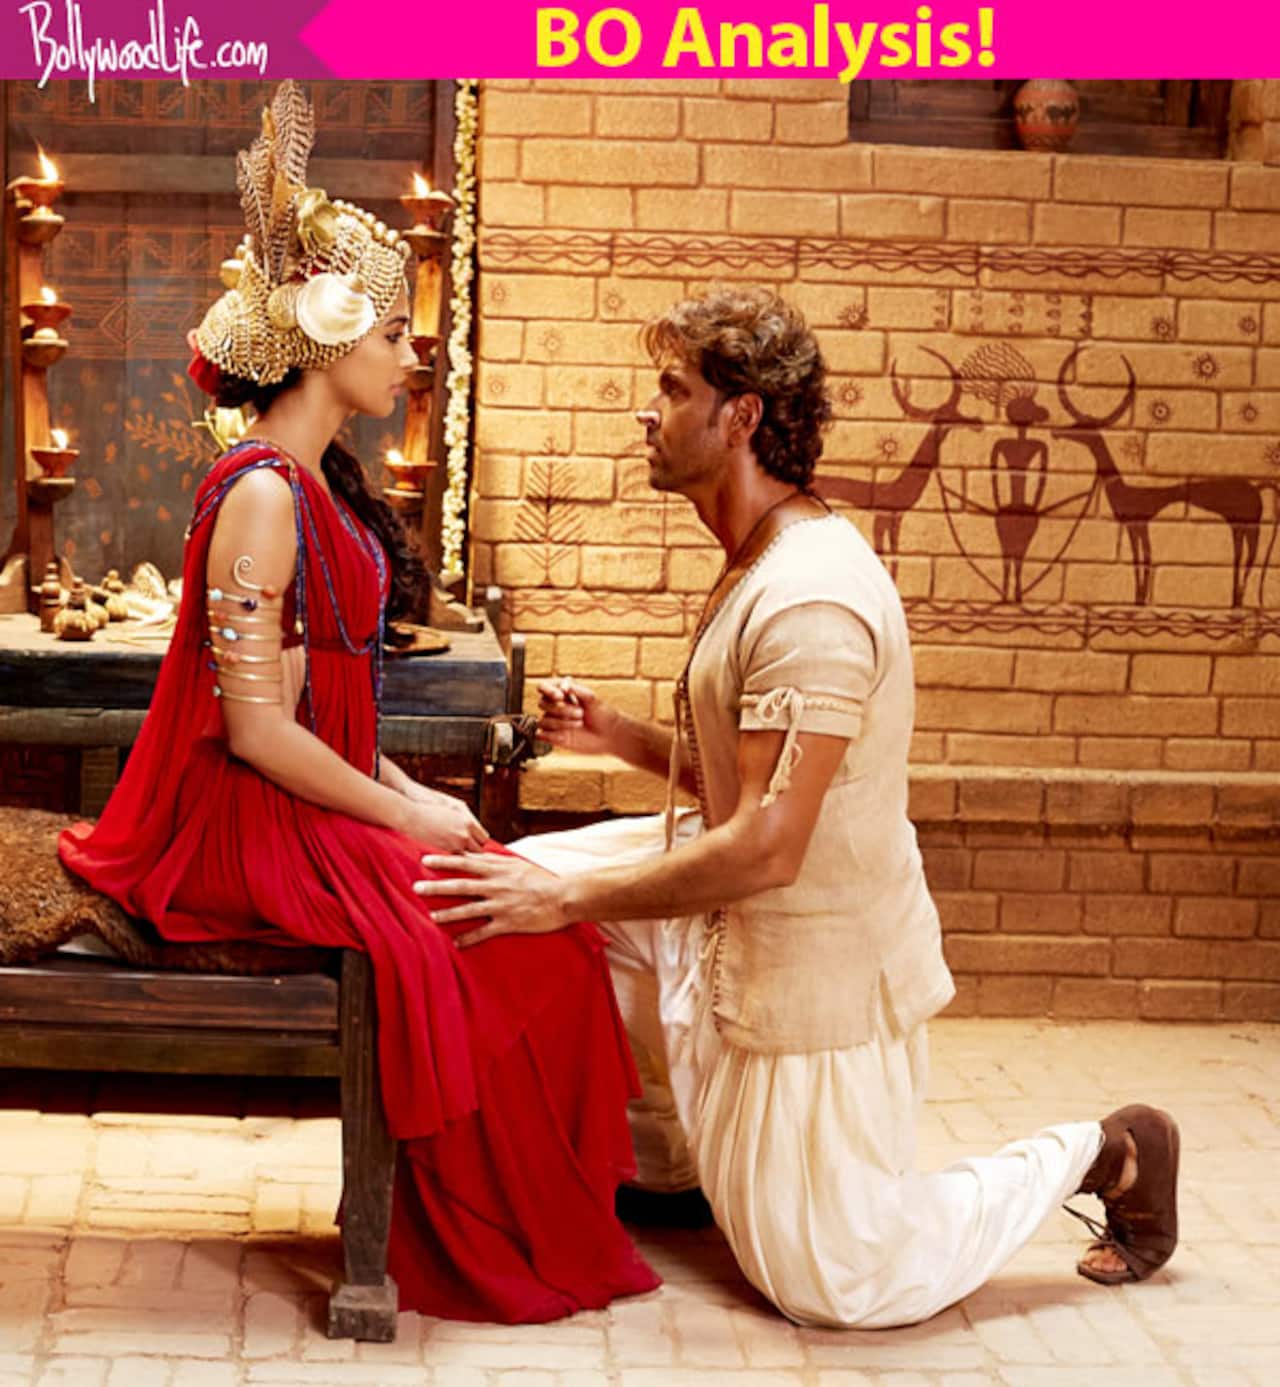 7 reasons why Hrithik Roshan's Mohenjo Daro turned out to be a DISAPPOINTMENT at the box office